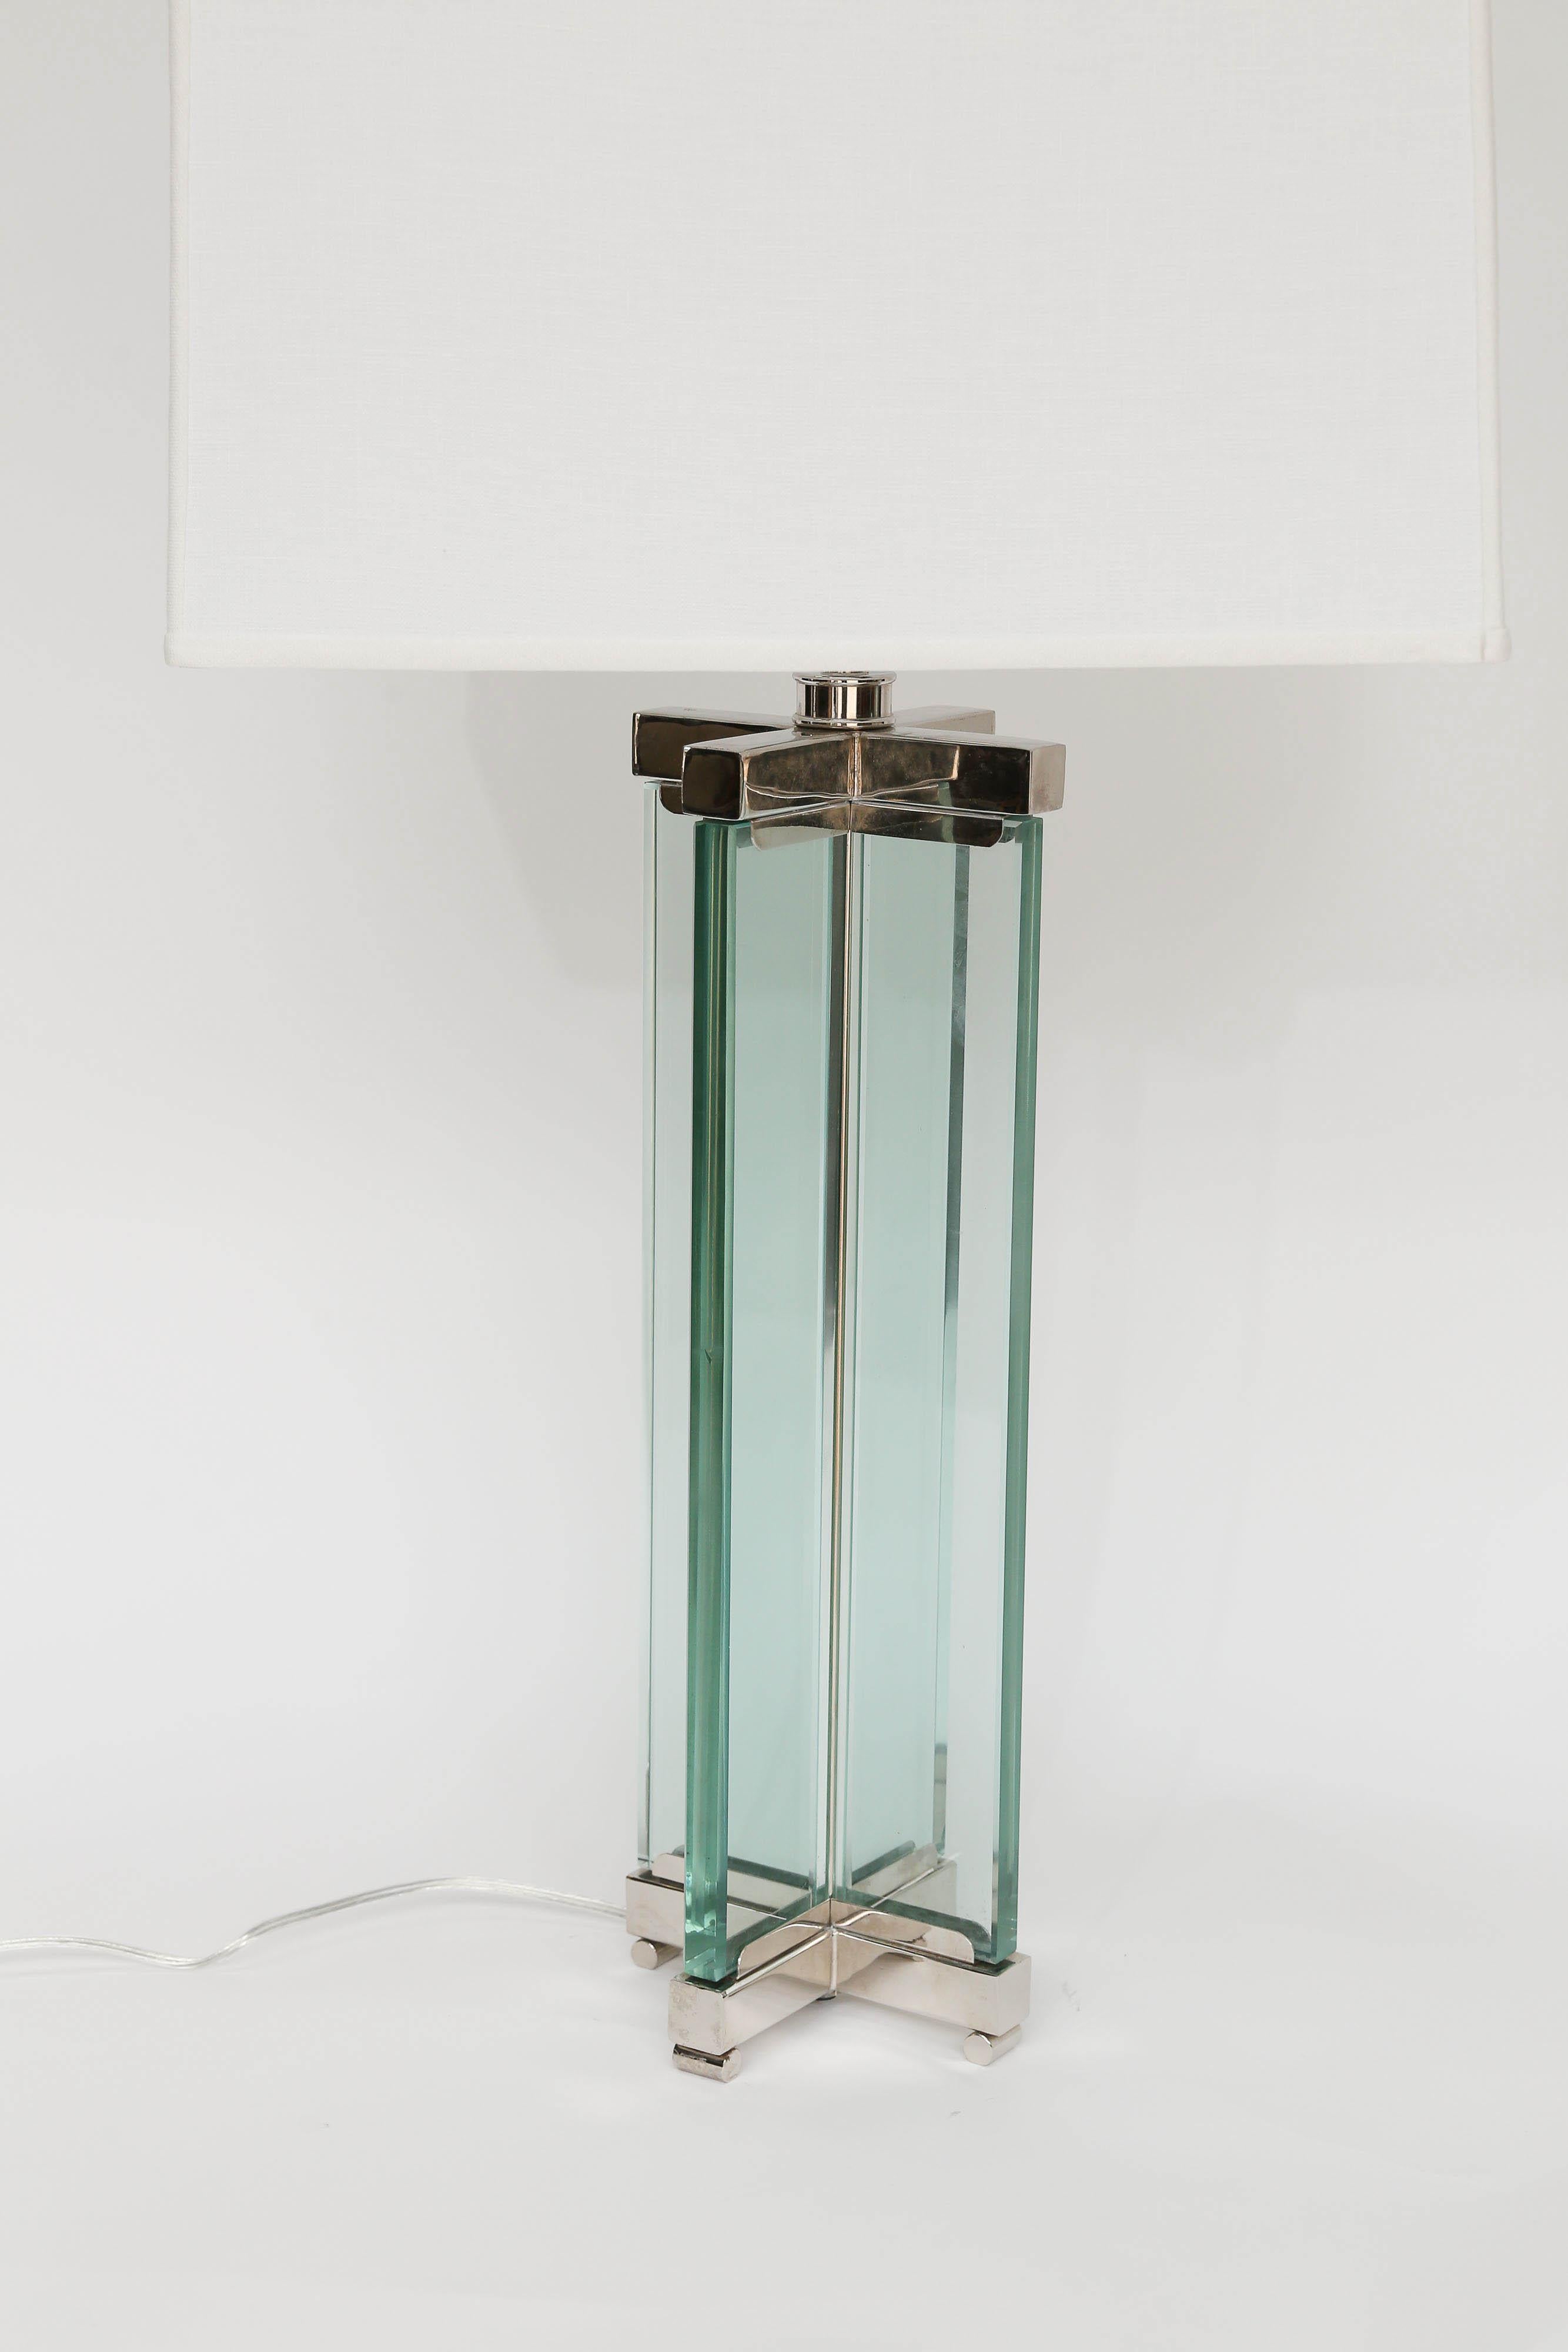 Lovely pair of midcentury English glass and chrome lamps. With a beautiful green tint to the .75 inch thick glass and chrome detail these lamps will add a touch of modern or complete the modern look to any room. Shade dimensions: 17.25